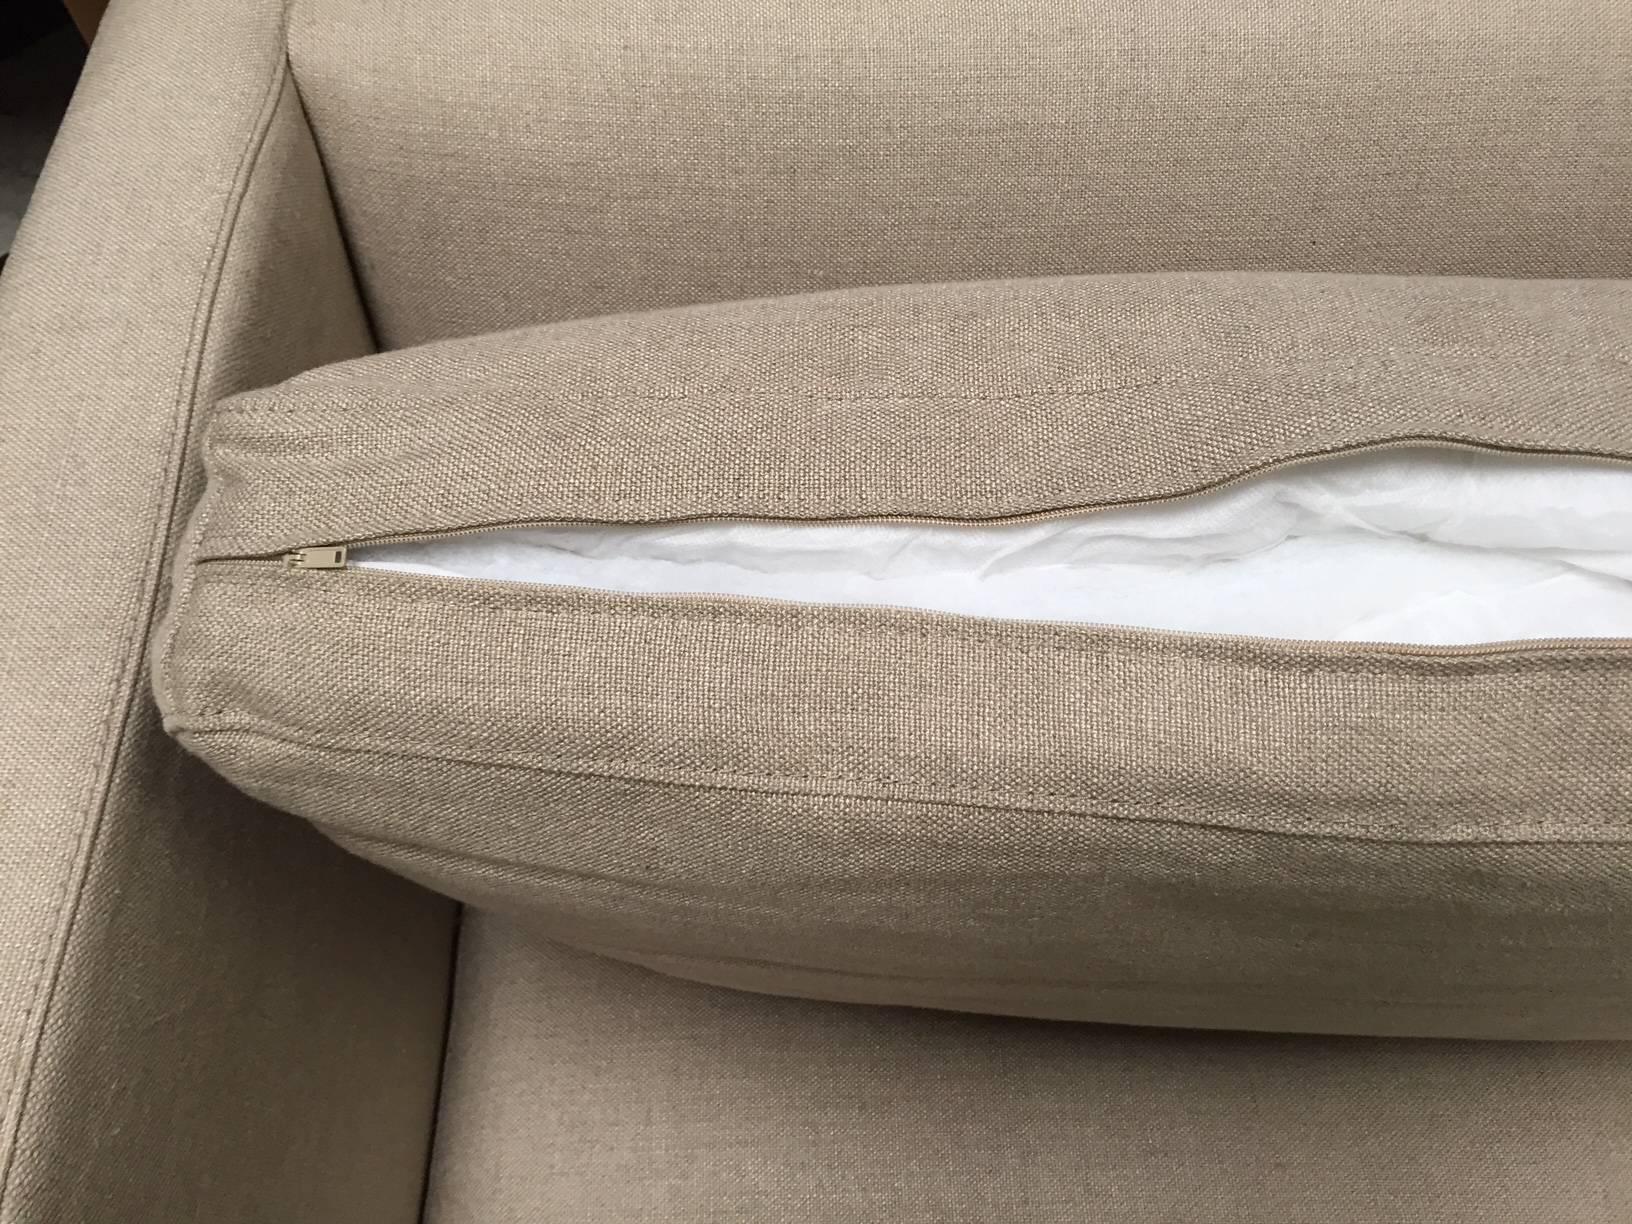 Spencer Sofa In Excellent Condition For Sale In West Hollywood, CA